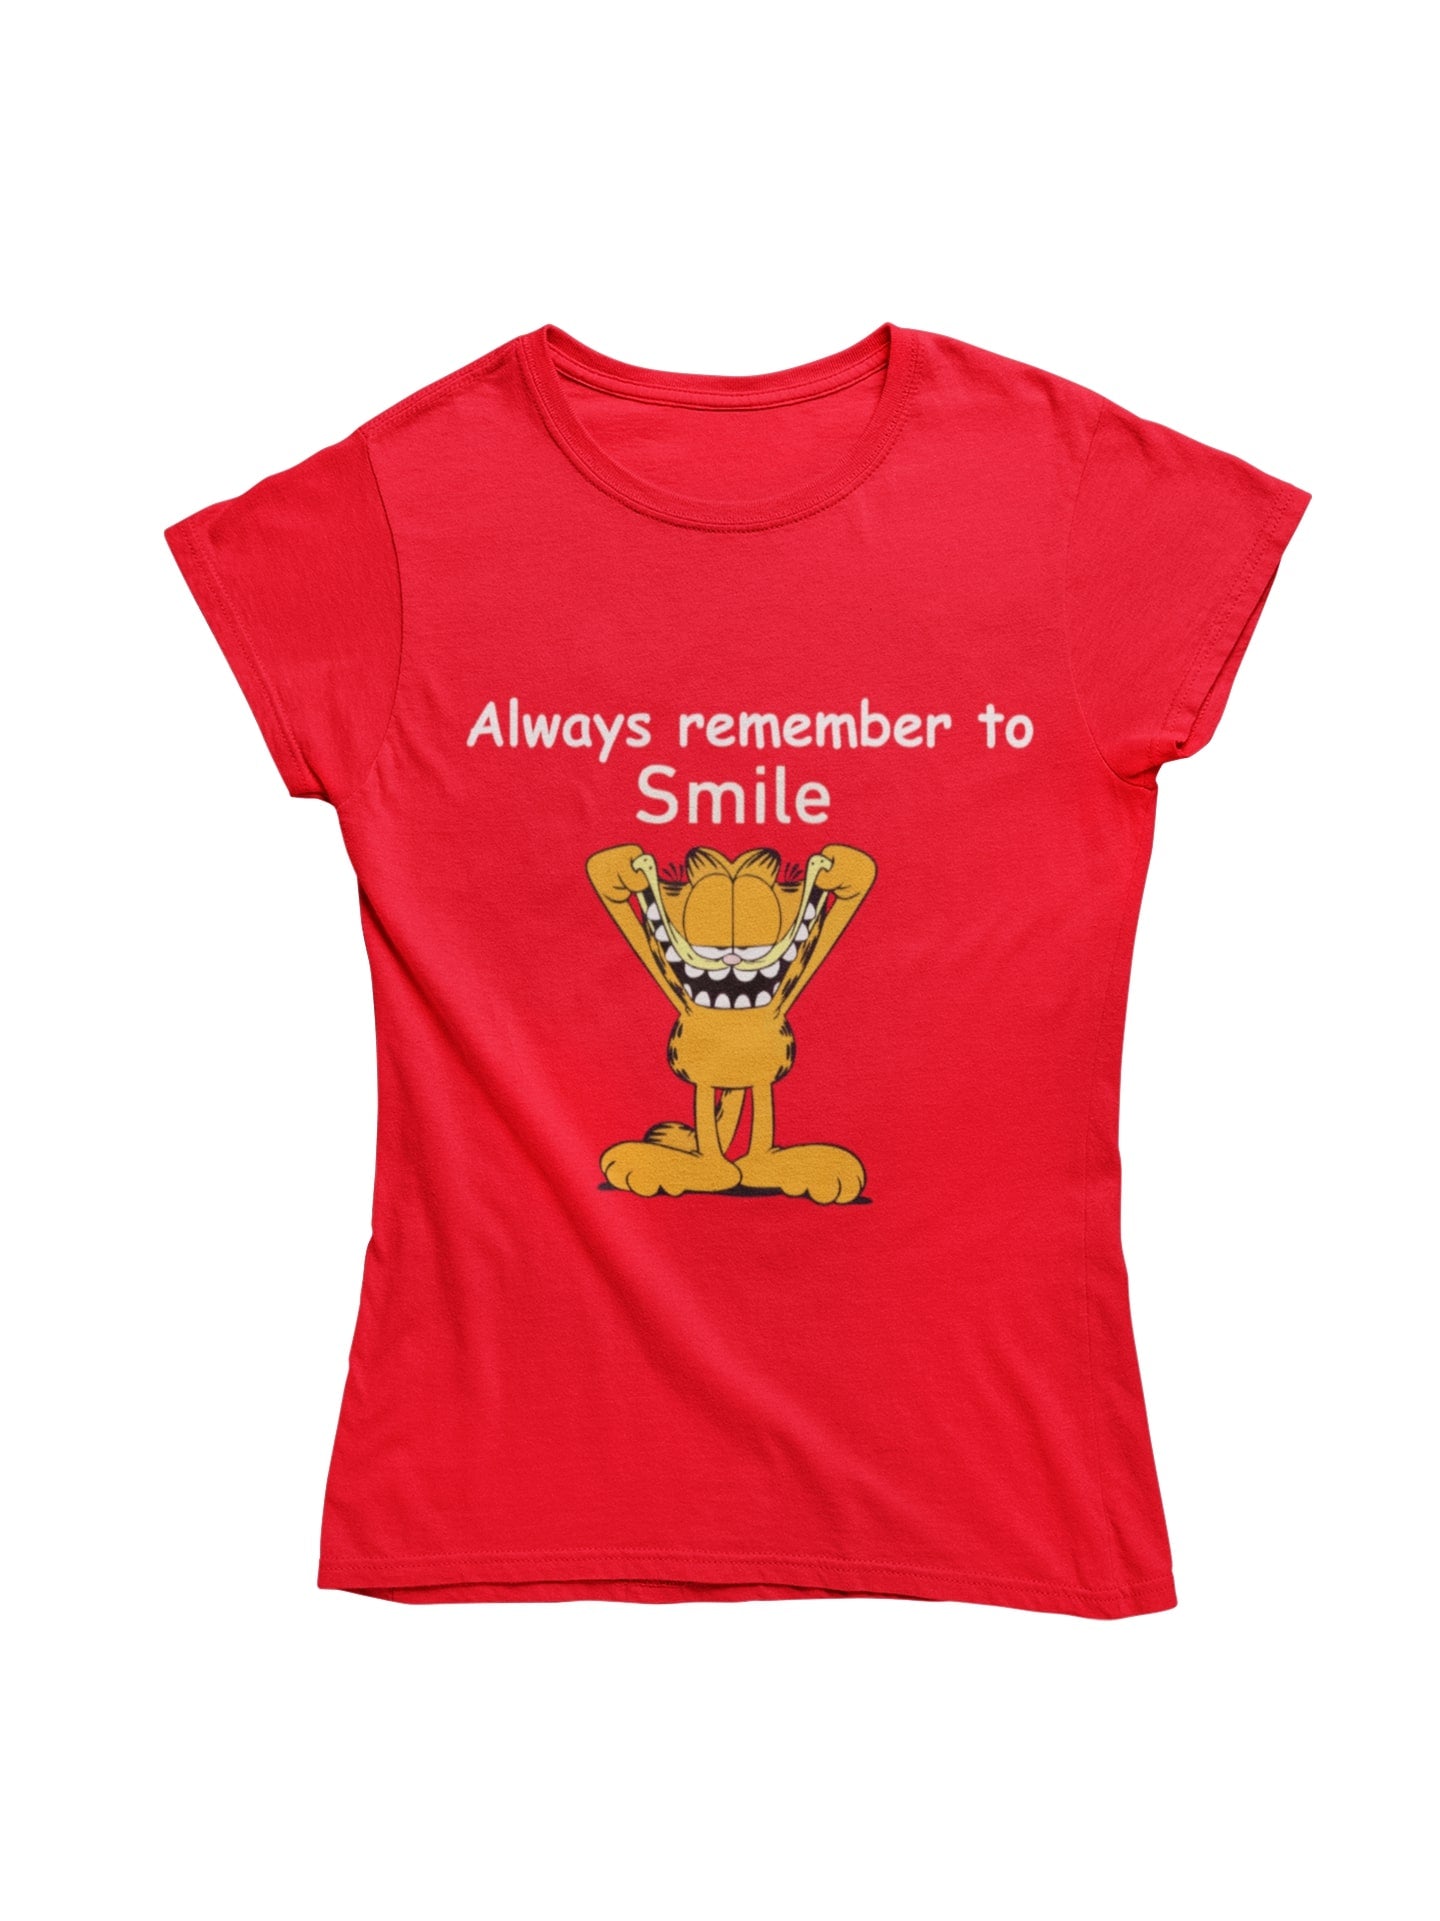 thelegalgang,Garfield-Always Remember to Smile-T shirt for Women,WOMEN.